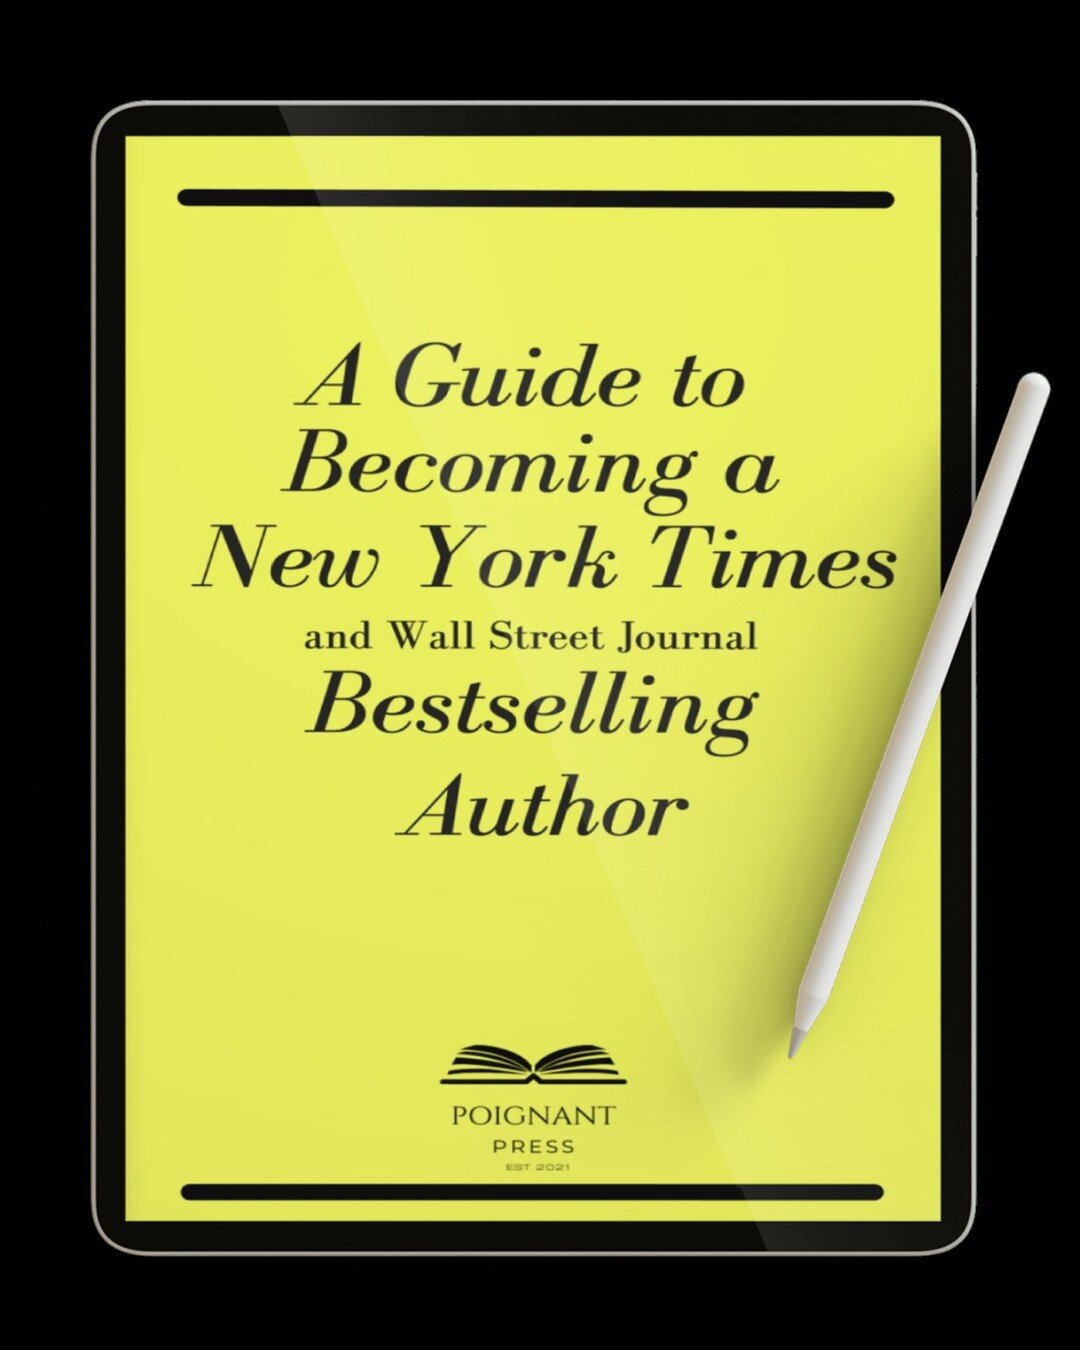 Have you ALWAYS wanted to know how to get on the New York Times and Wall Street Journal Bestseller lists? Well, I unveil the mystery in this #free guide. Read it and weep or rejoice... depending on how you look at it. LINK in bio.